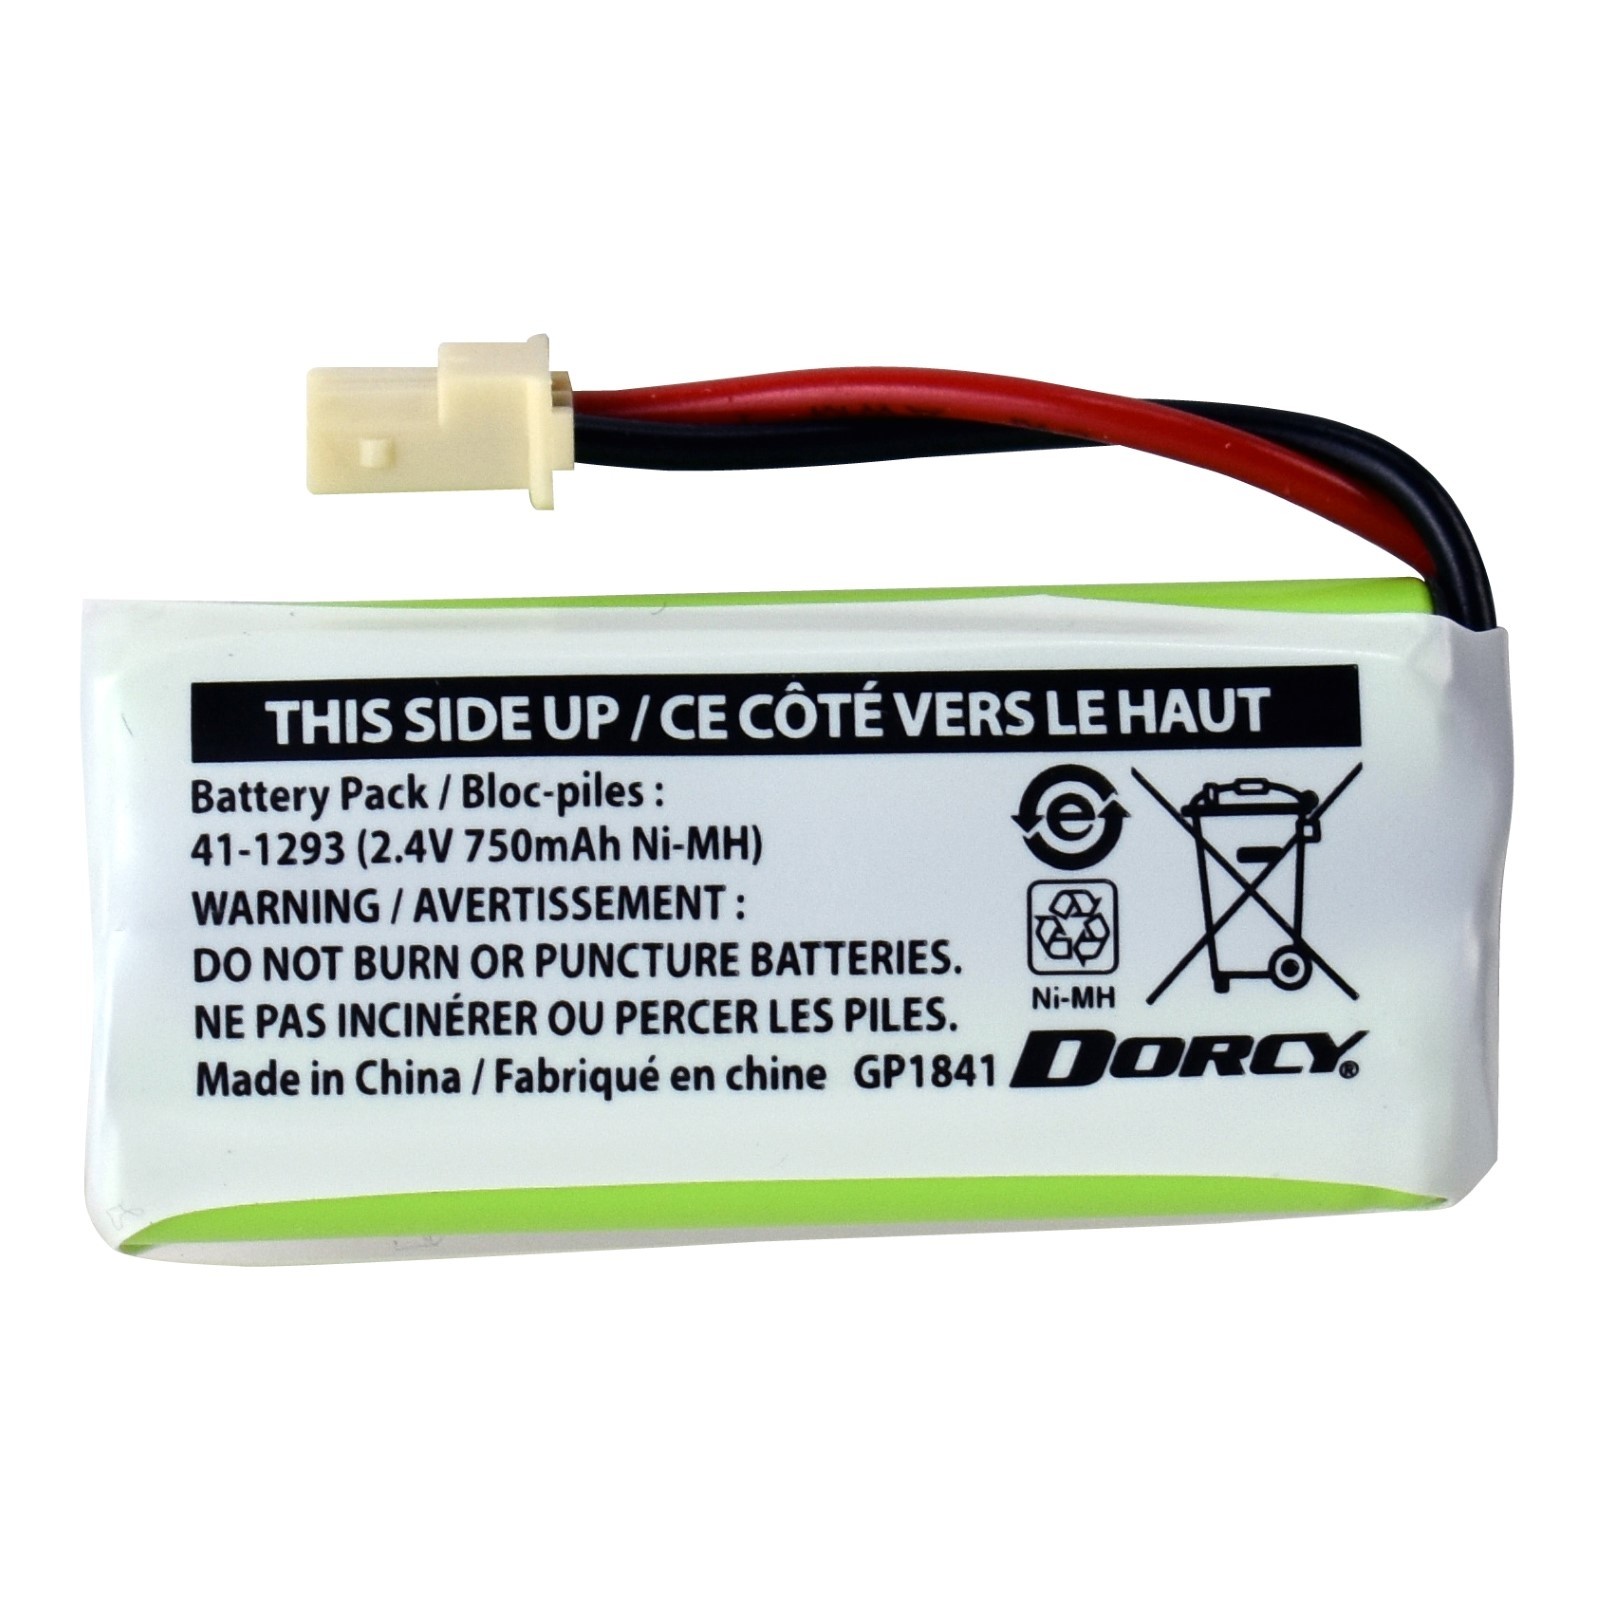 Dorcy 41-1293 Replacement Cordless Phone Battery